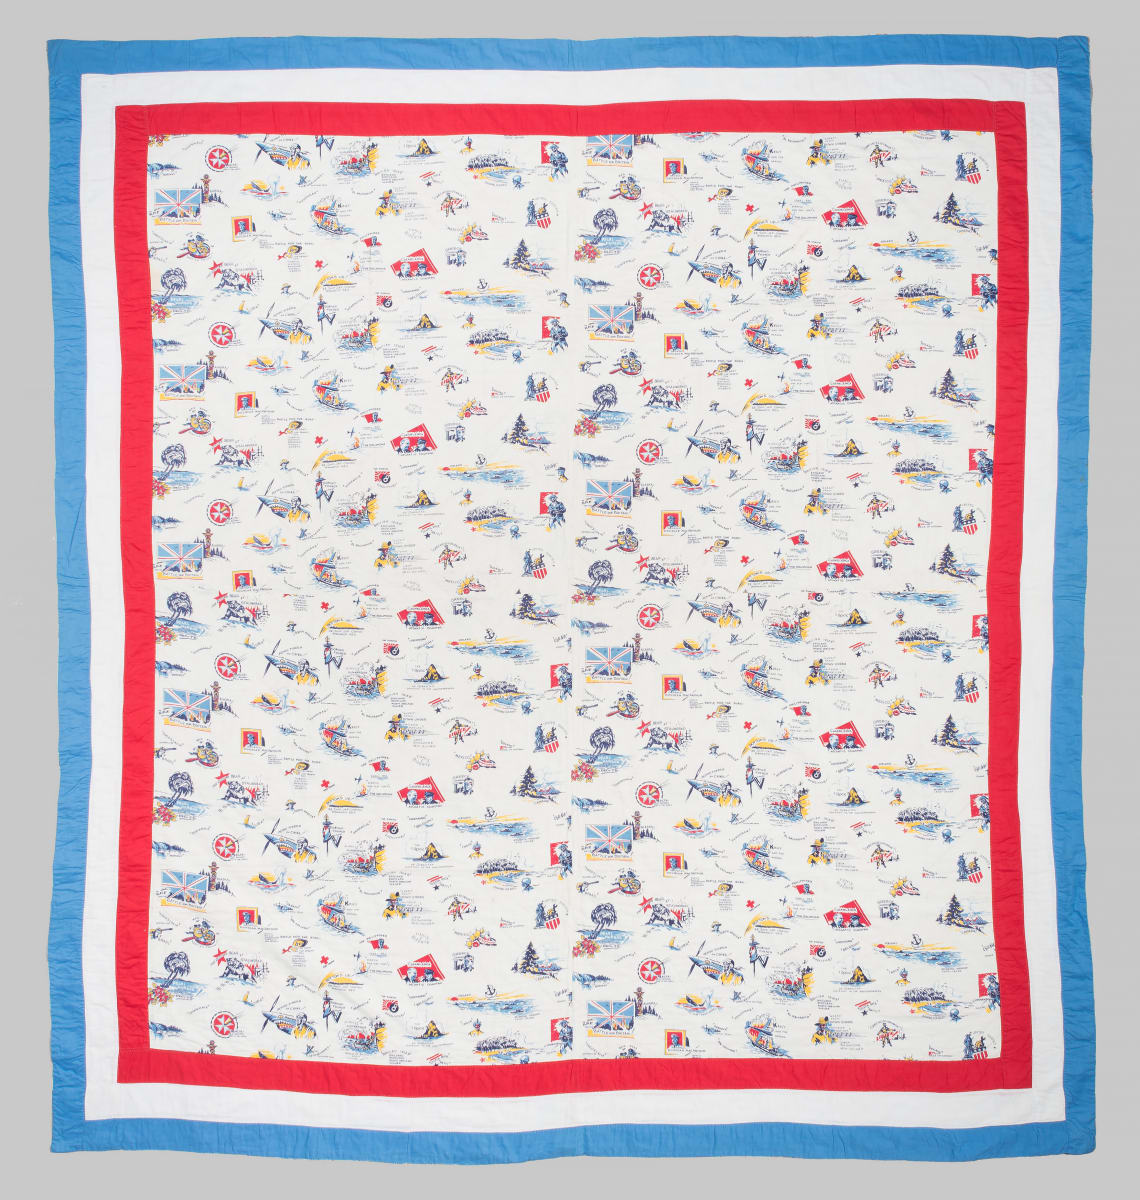 Whole Cloth with Borders by Unknown Artist 